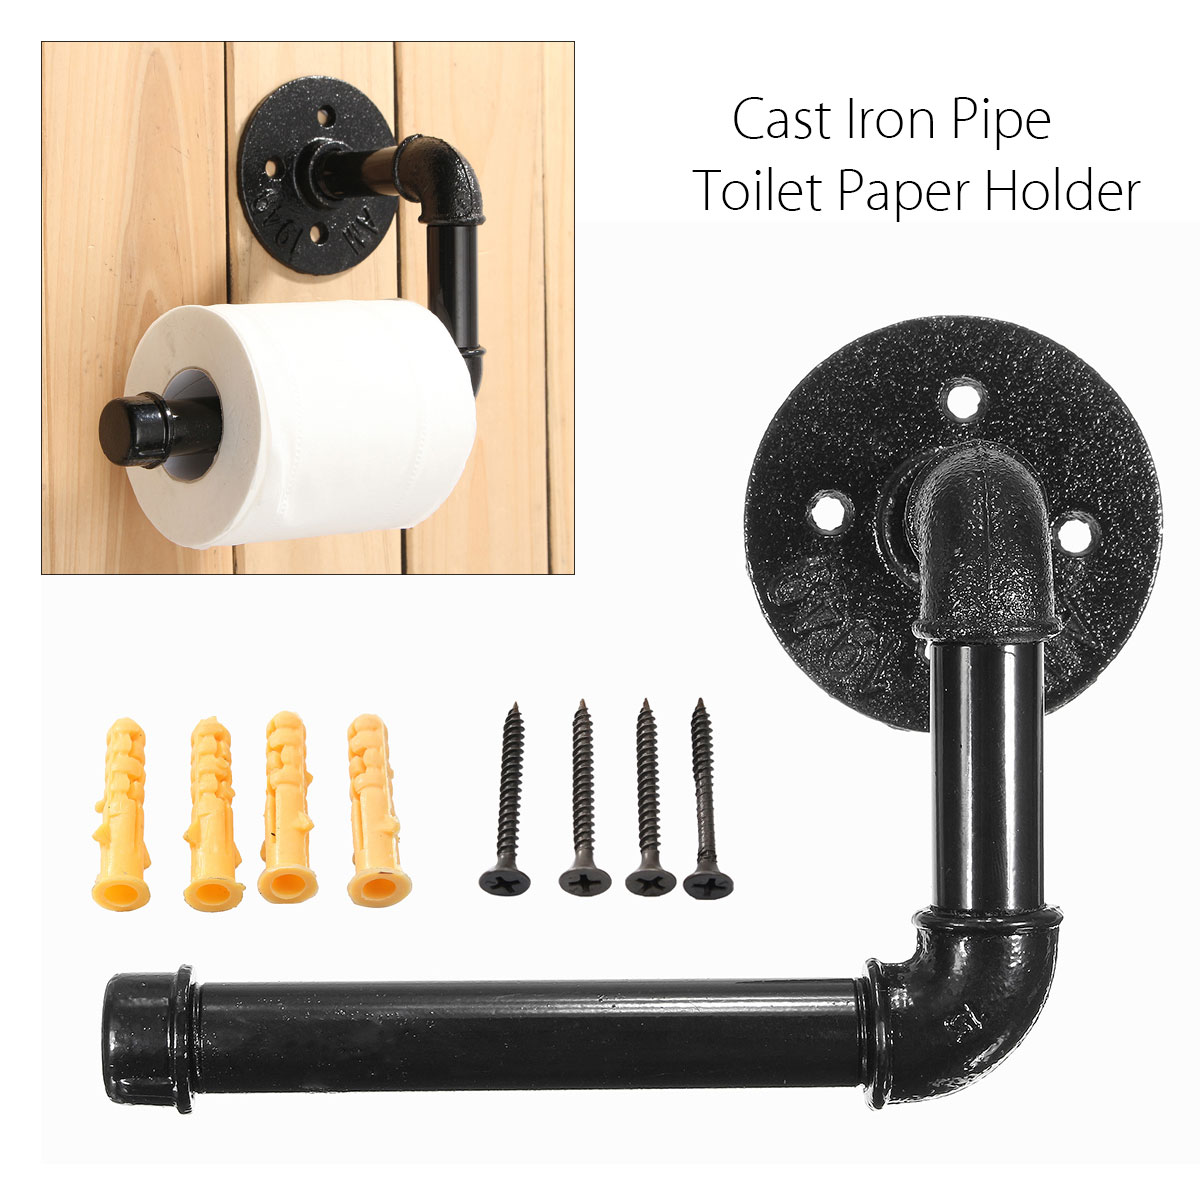 Industrial-Rustic-Style-Iron-Pipe-Wall-Mount-Toilet-Tissue-Paper-Roll-Holder-Towel-Bar-1226340